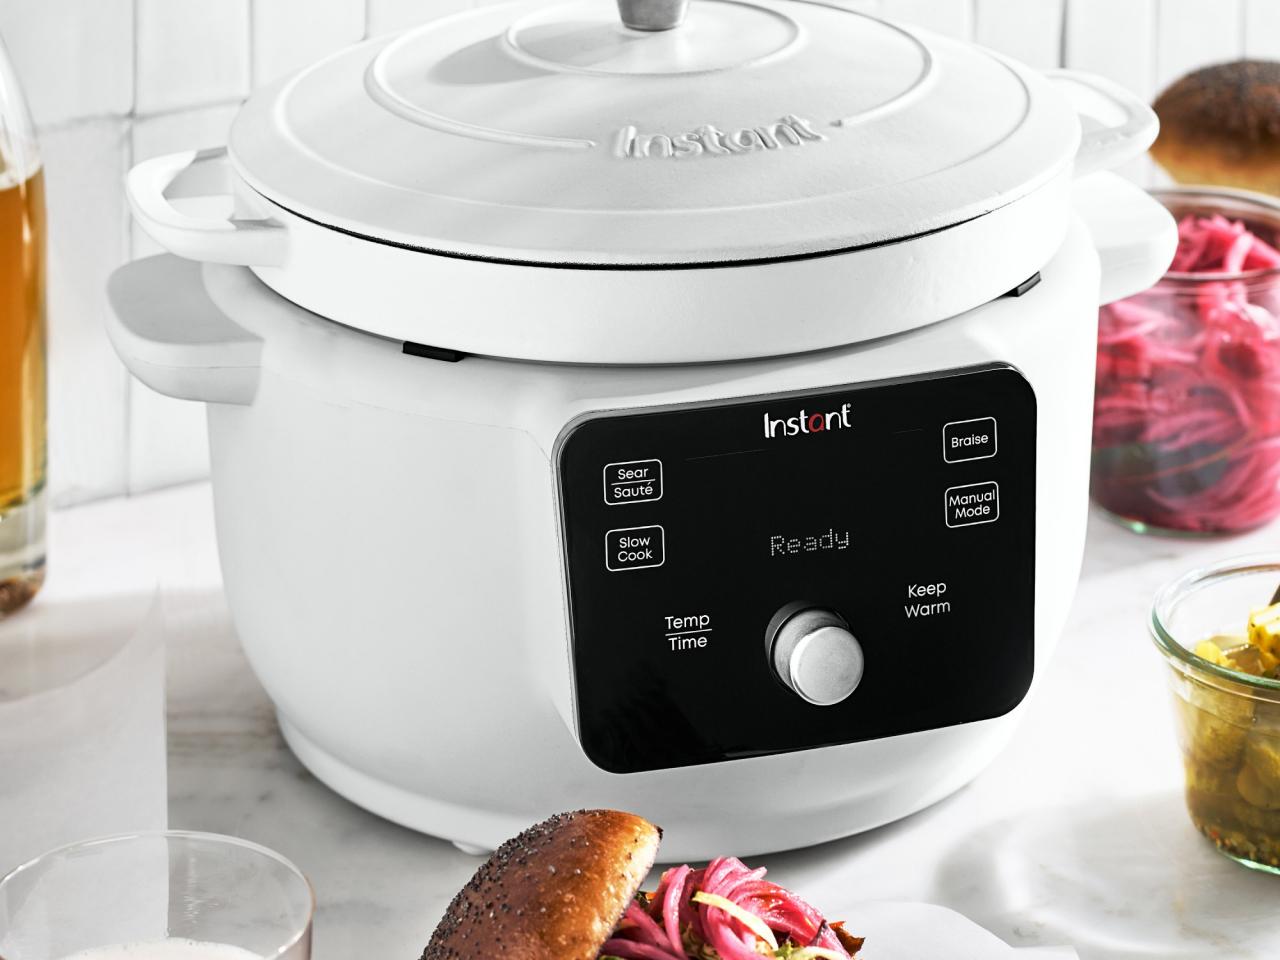 https://hgtvhome.sndimg.com/content/dam/images/hgtv/products/2023/12/18/rx_williamssonoma_instant-precision-dutch-oven-slow-cooker.jpeg.rend.hgtvcom.1280.960.suffix/1702917388527.jpeg